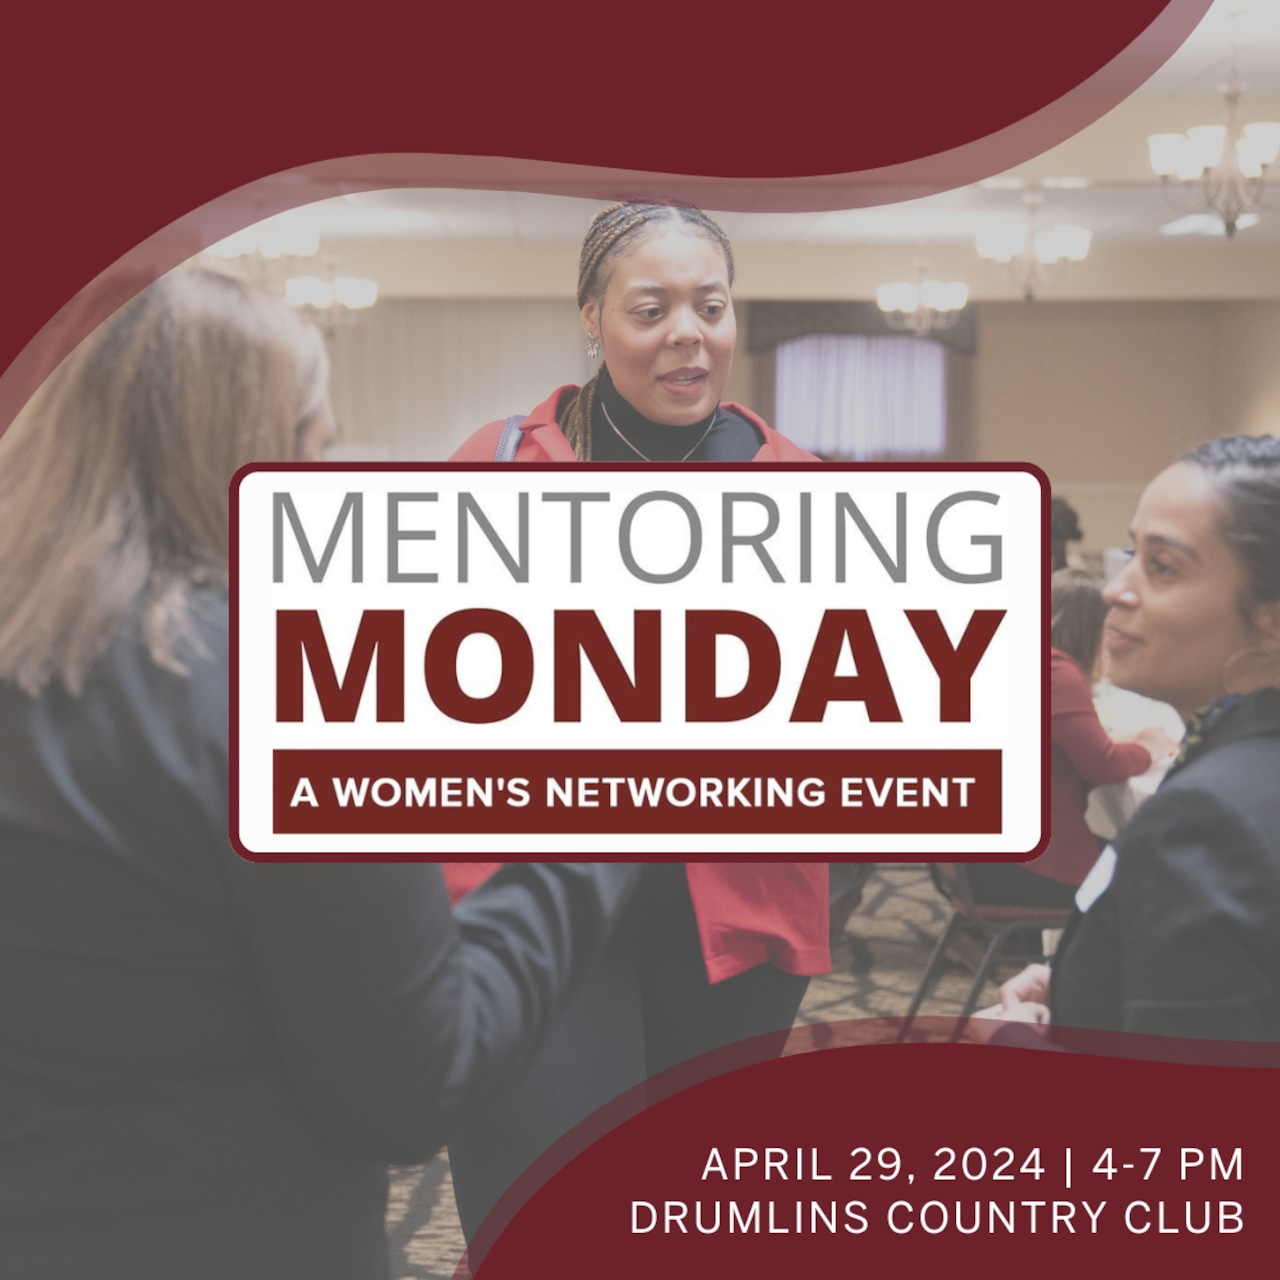 Take the awkward out of networking, make professional connections & update your headshot at Mentoring Monday [Video]